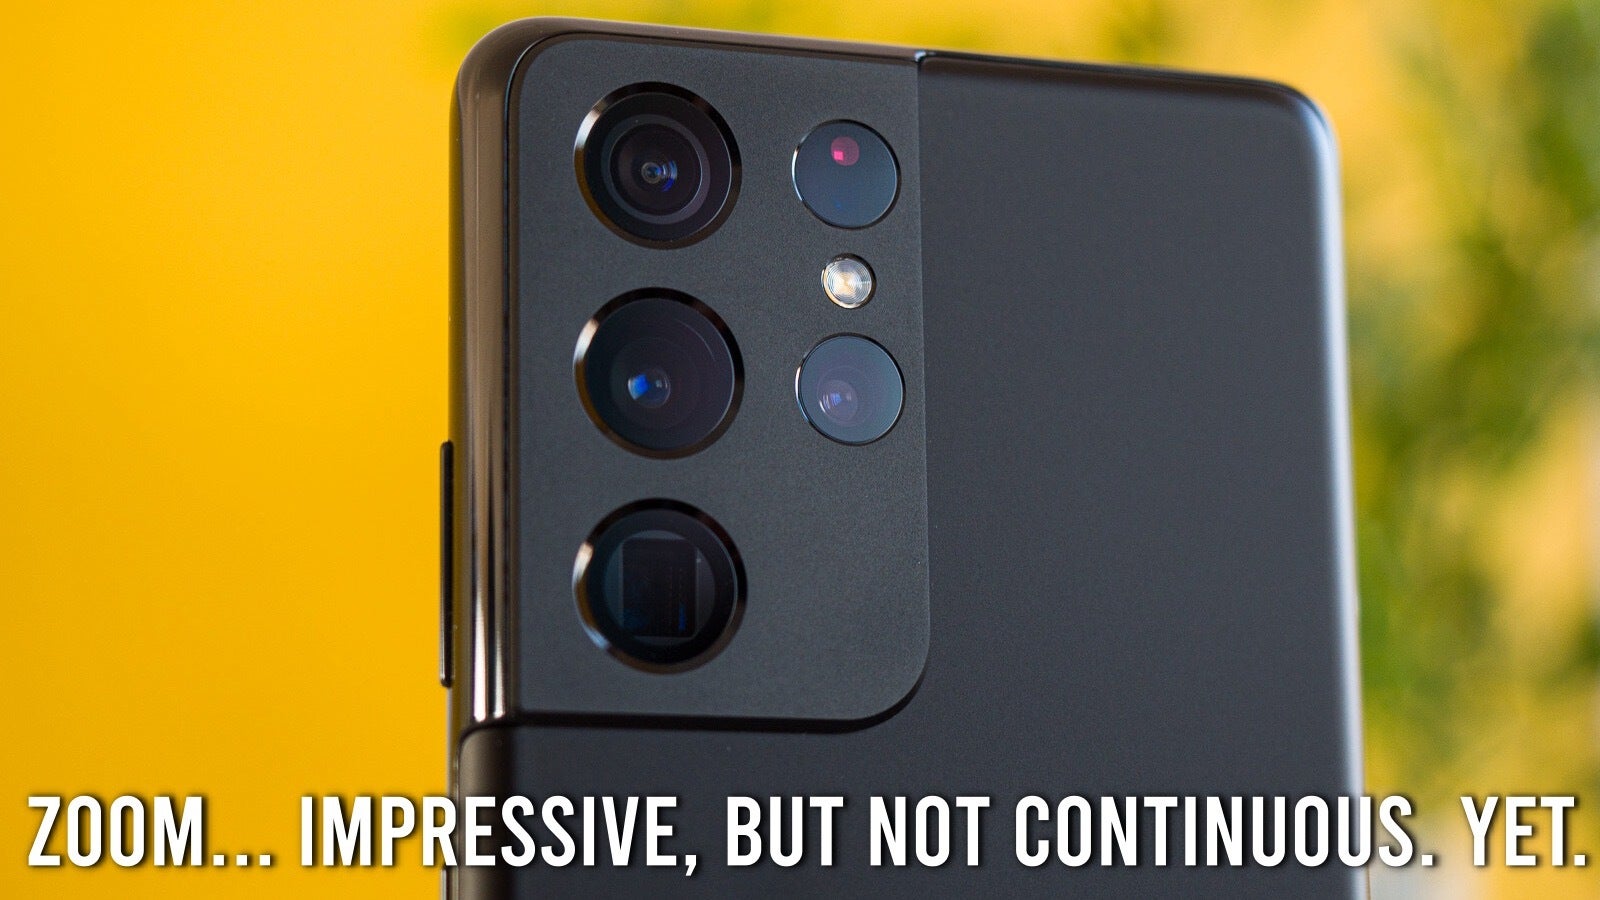 Even the best can get much better. - Monumental: Oppo's continuous optical zoom - a huge leap for smartphone cameras?